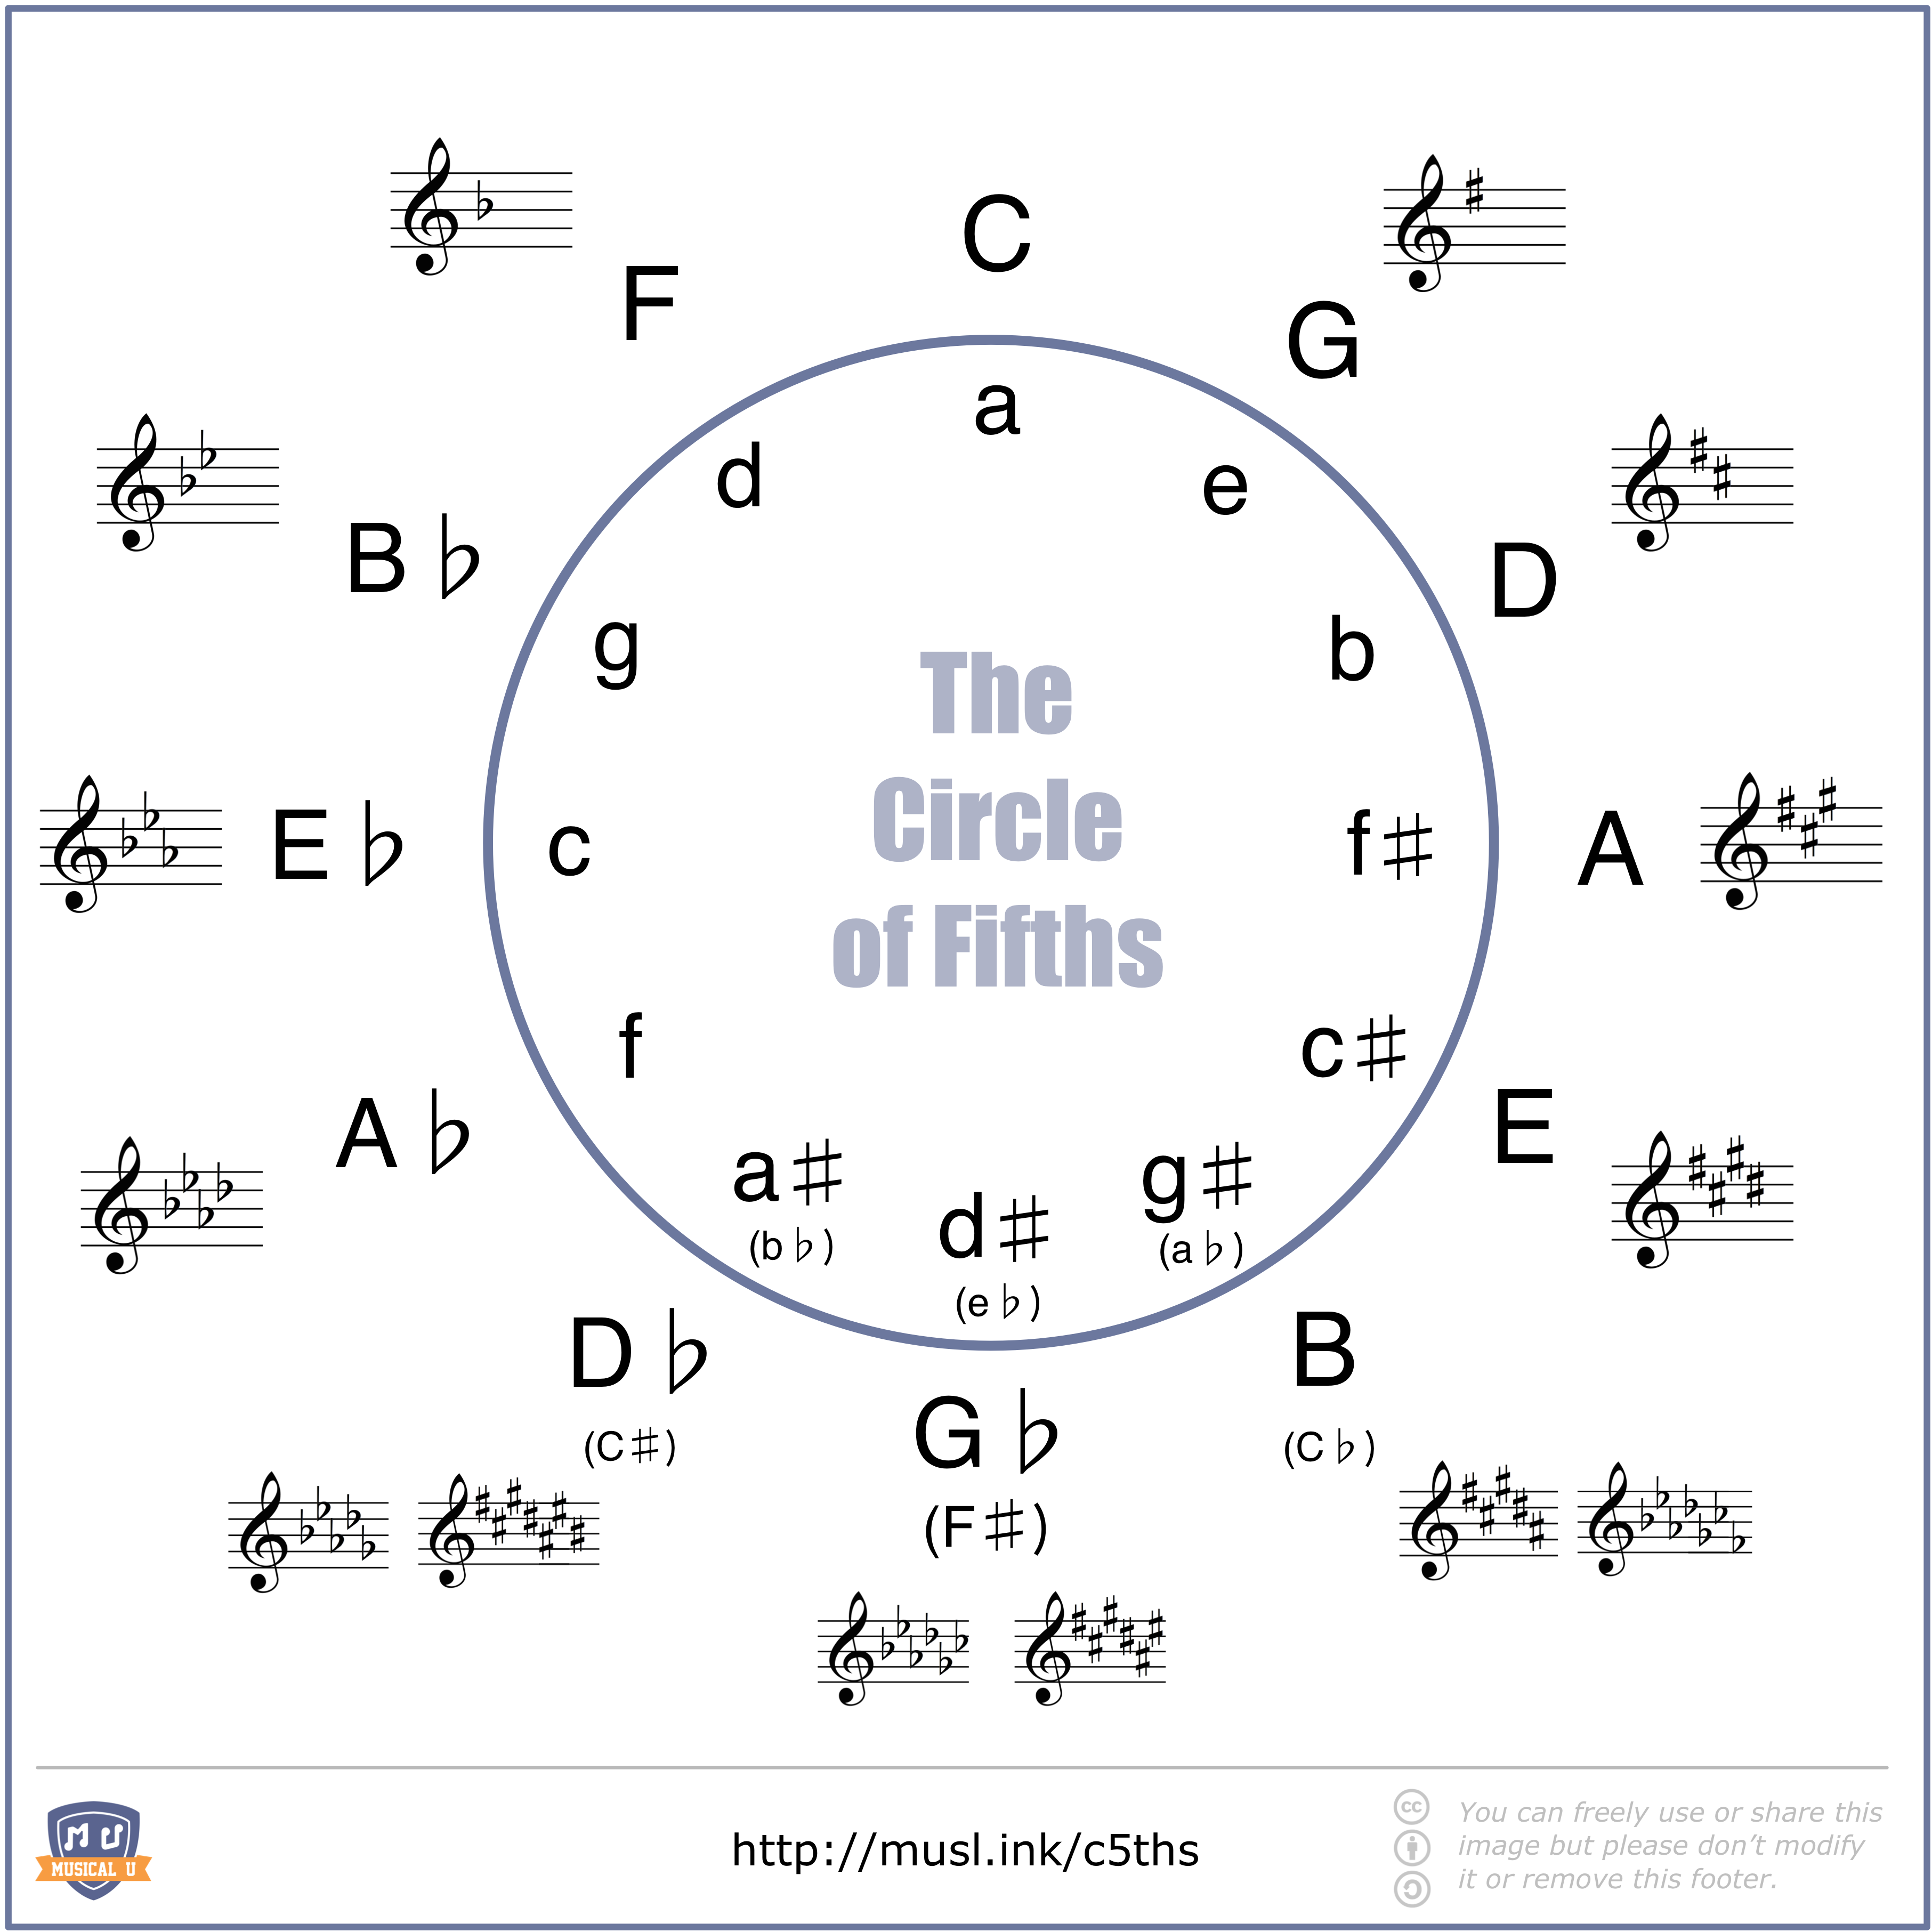 The circle of fifths with minor keys included